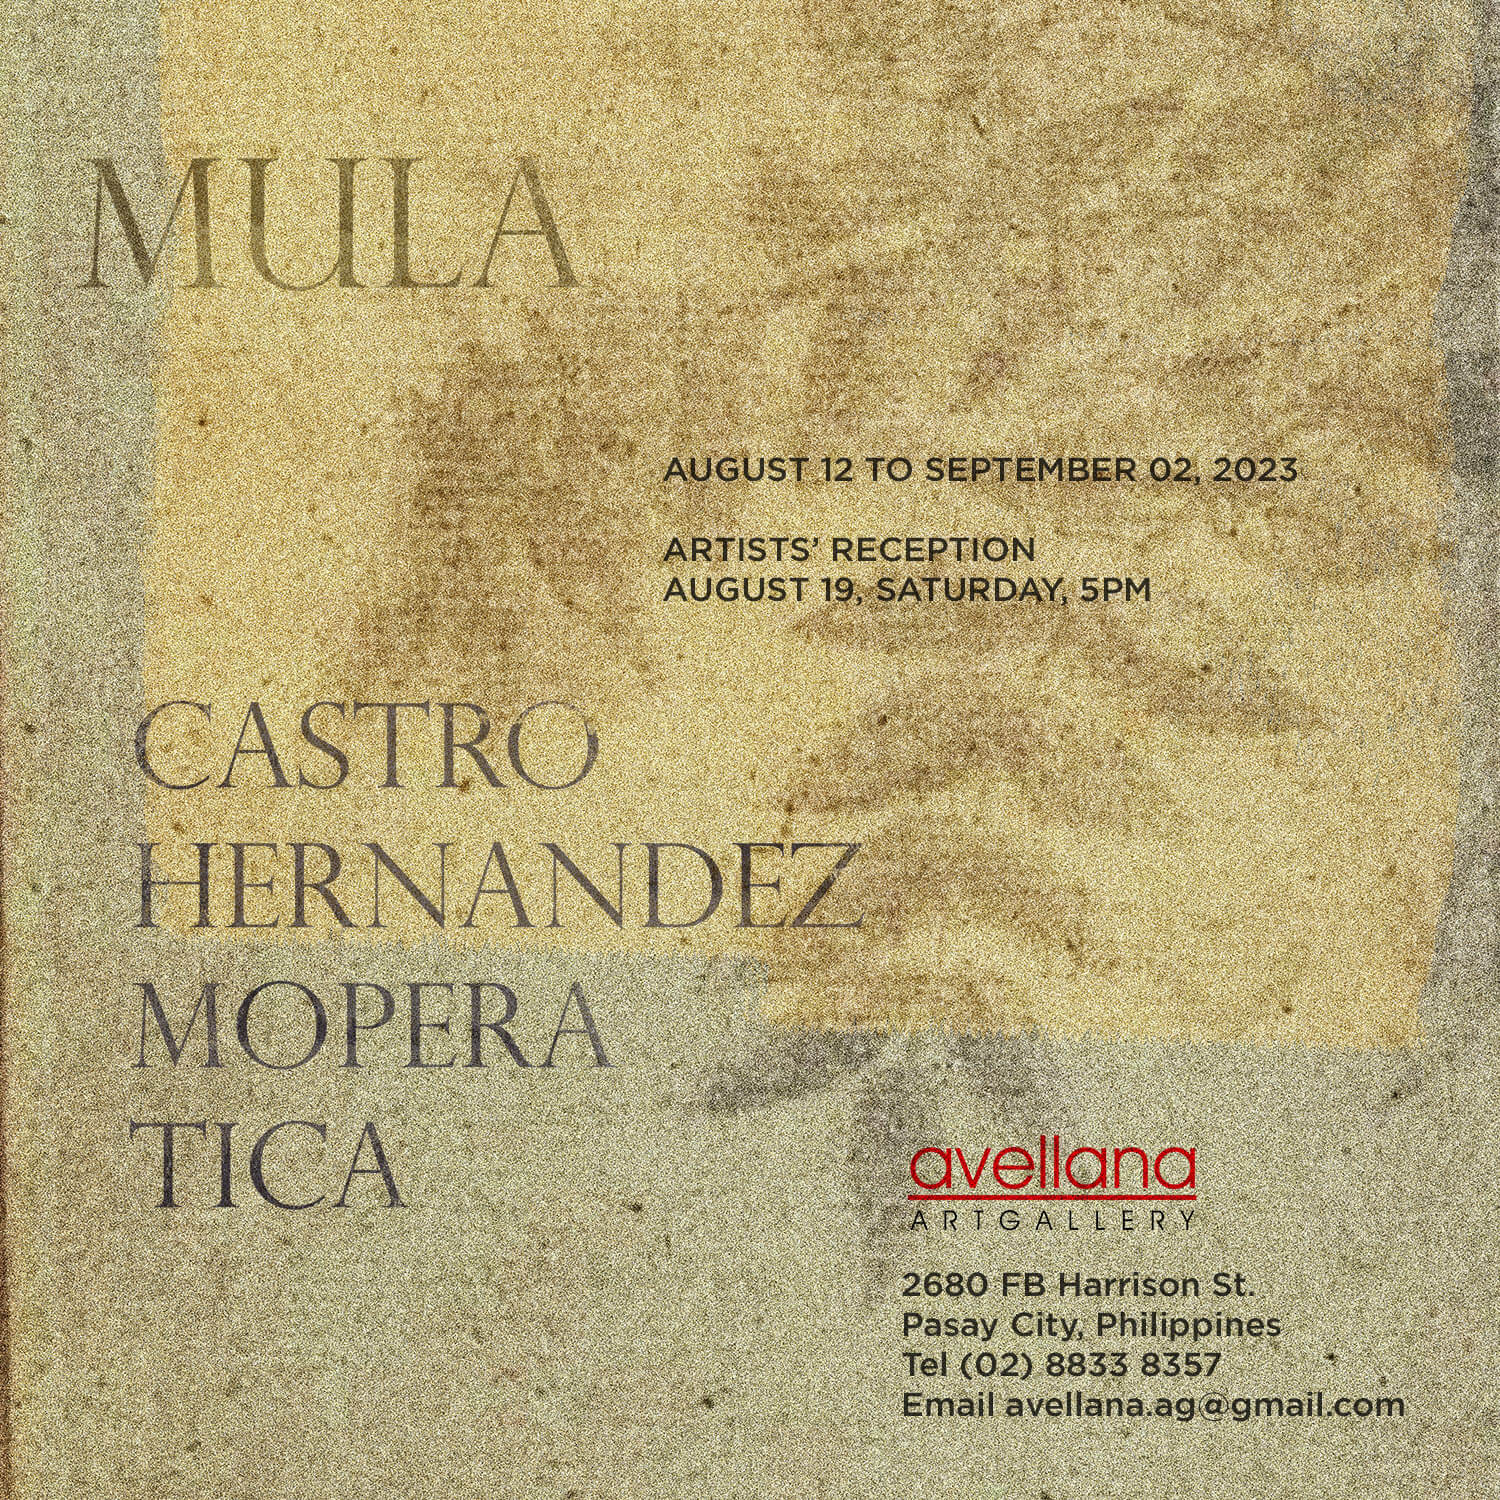 The official invite of Avellana Art Gallery's "Mula" exhibition